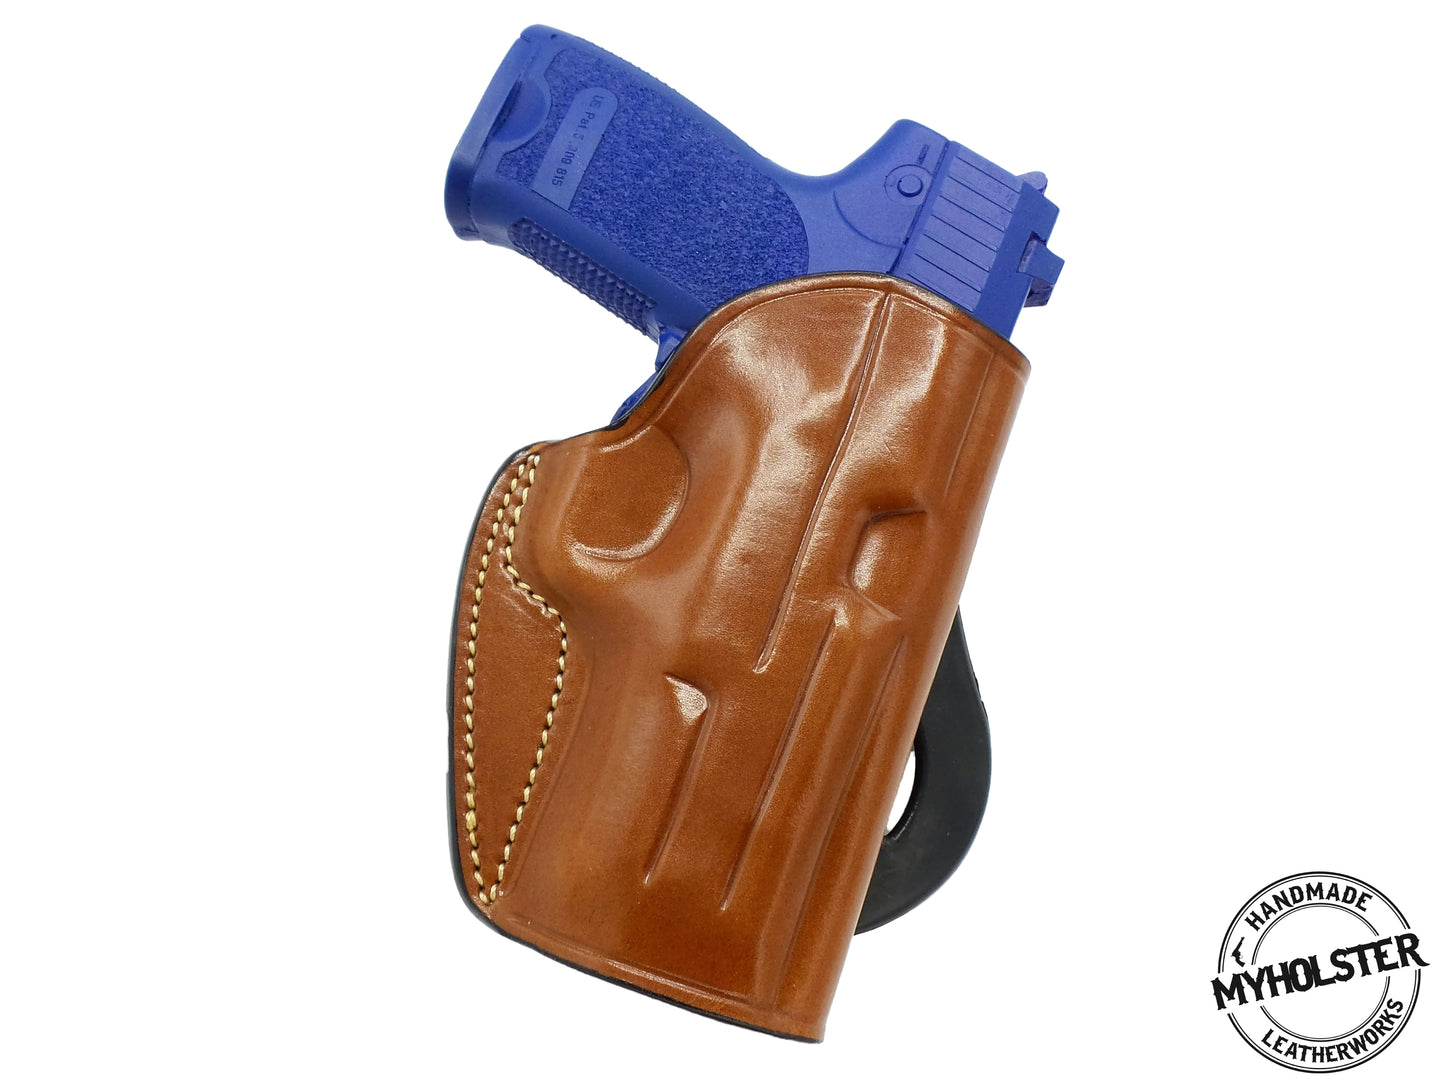 Beretta Px4 Storm Type F Full Size .40 S&W OWB Quick Draw Right Hand Leather Paddle Holster